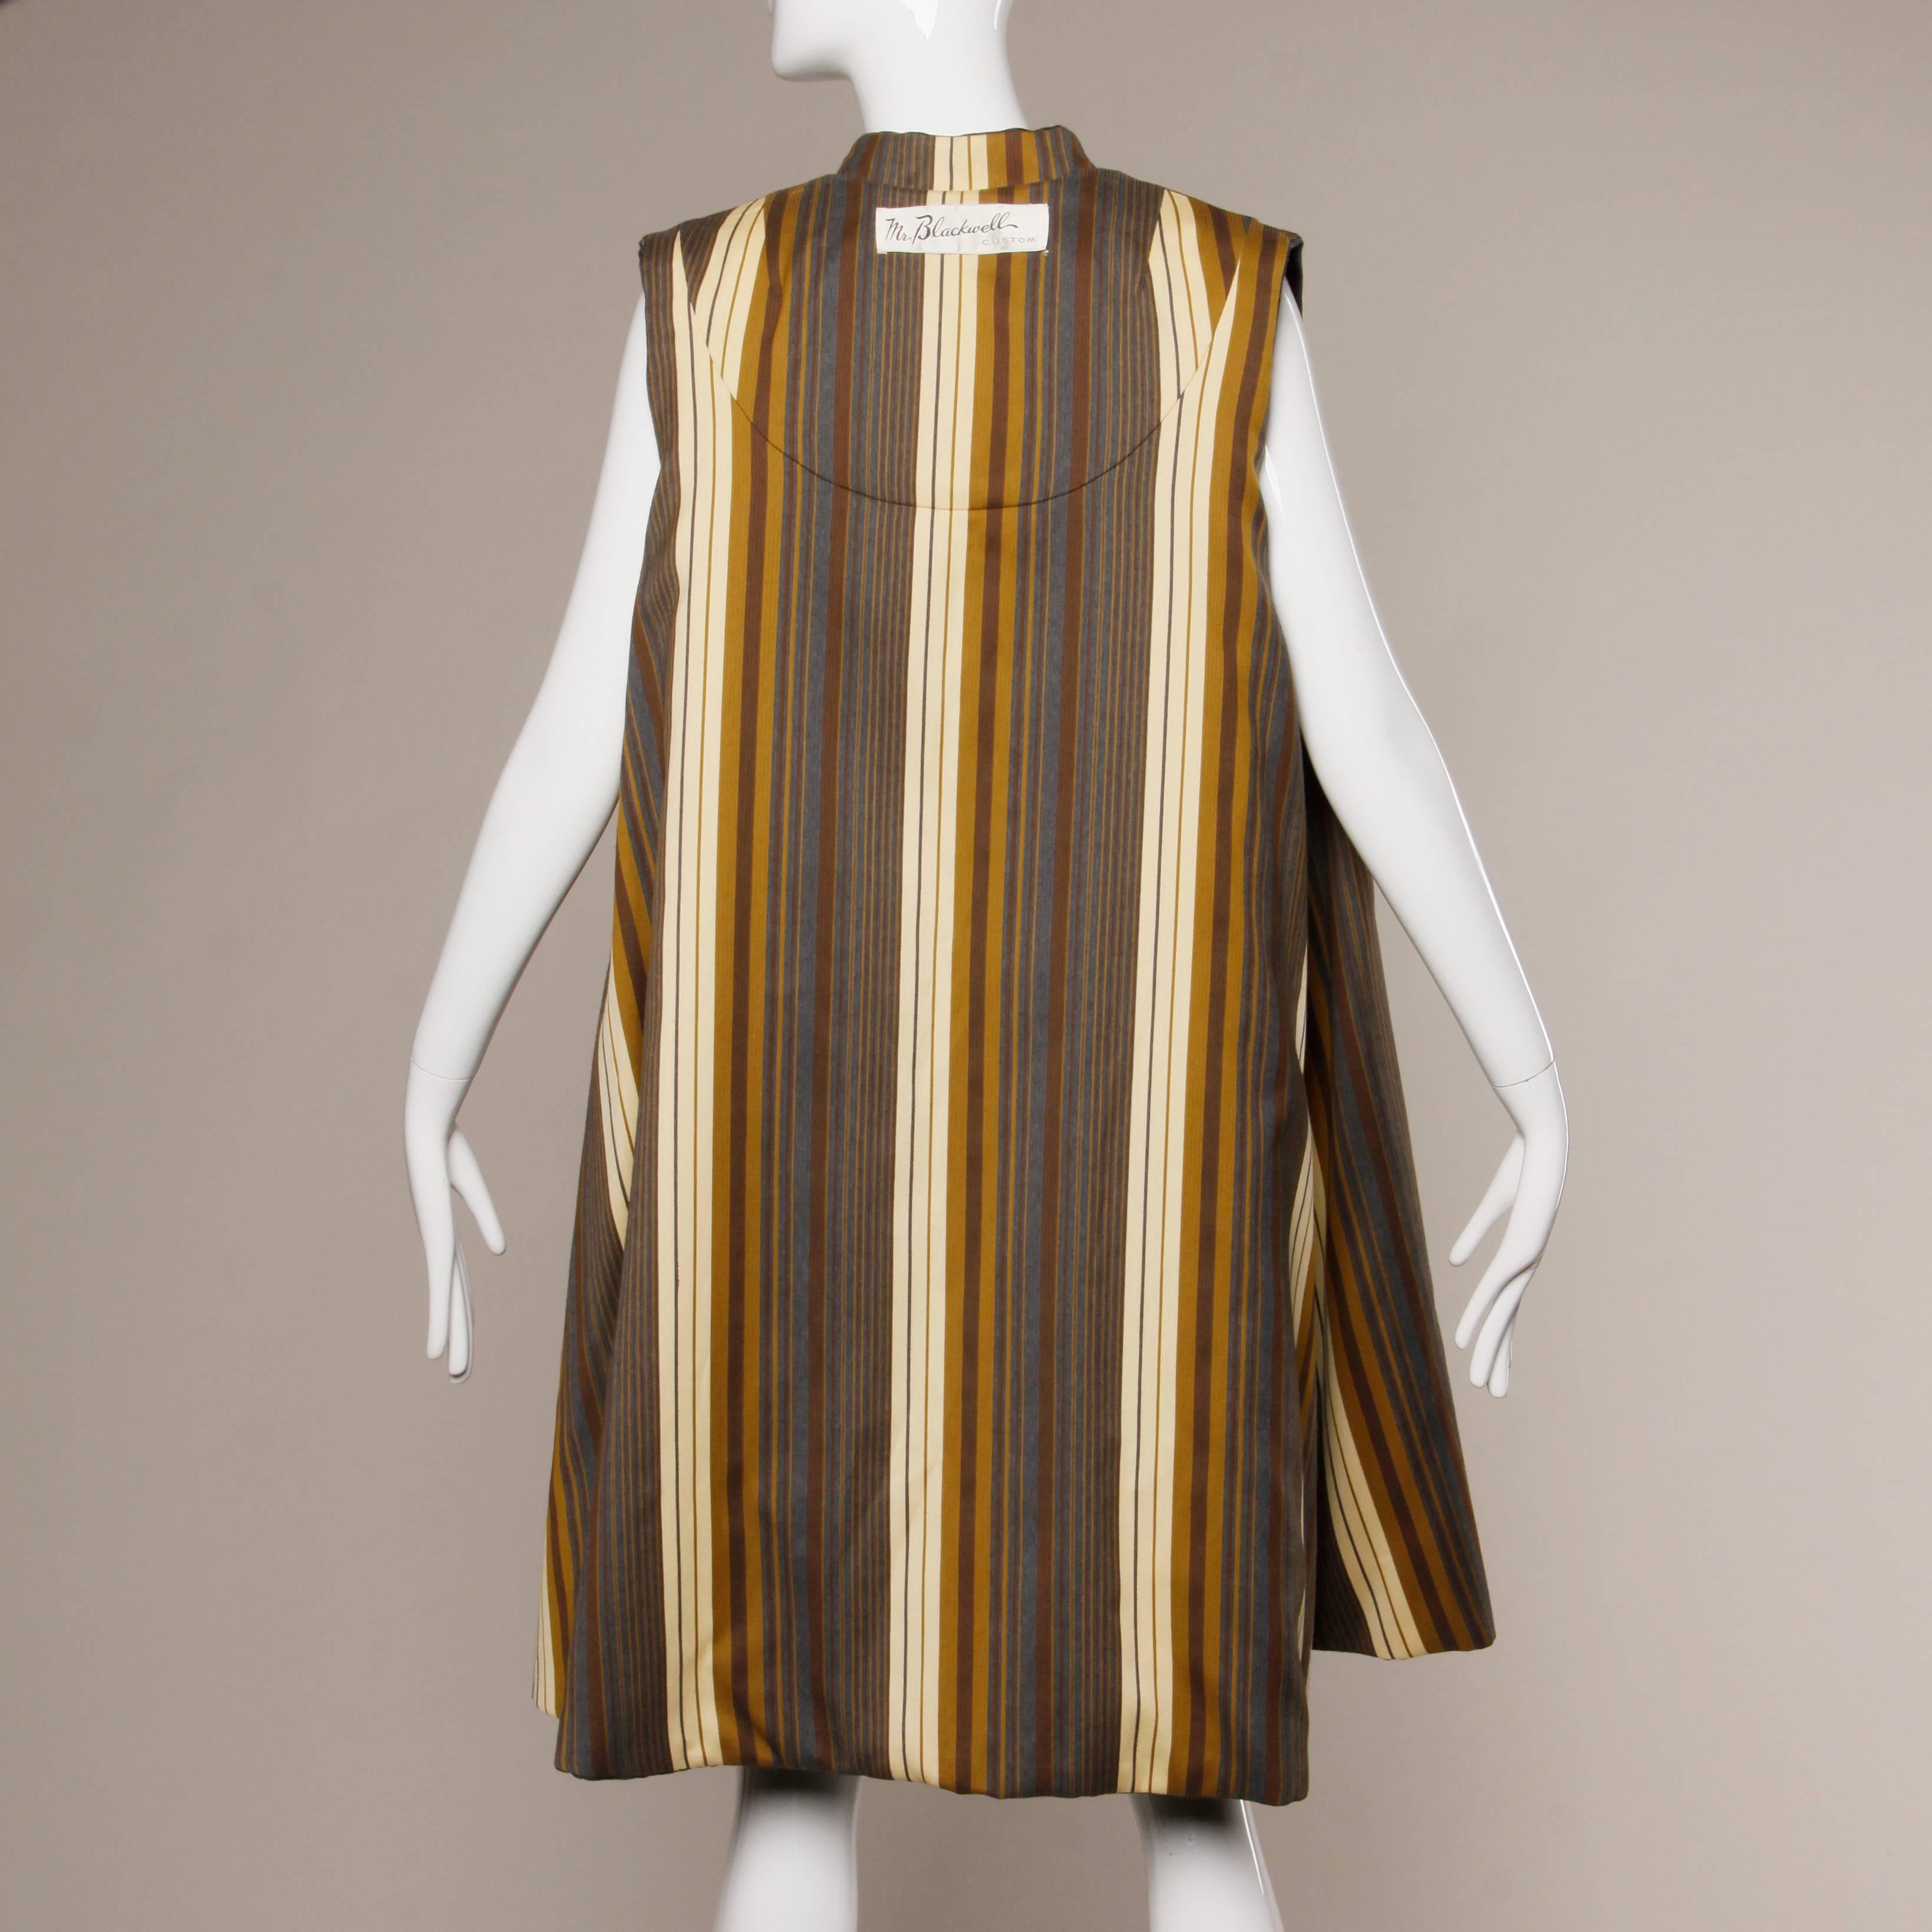 Women's Stunning Mr. Blackwell Vintage 1960s Wool + Silk Cape Coat with Striped Lining For Sale